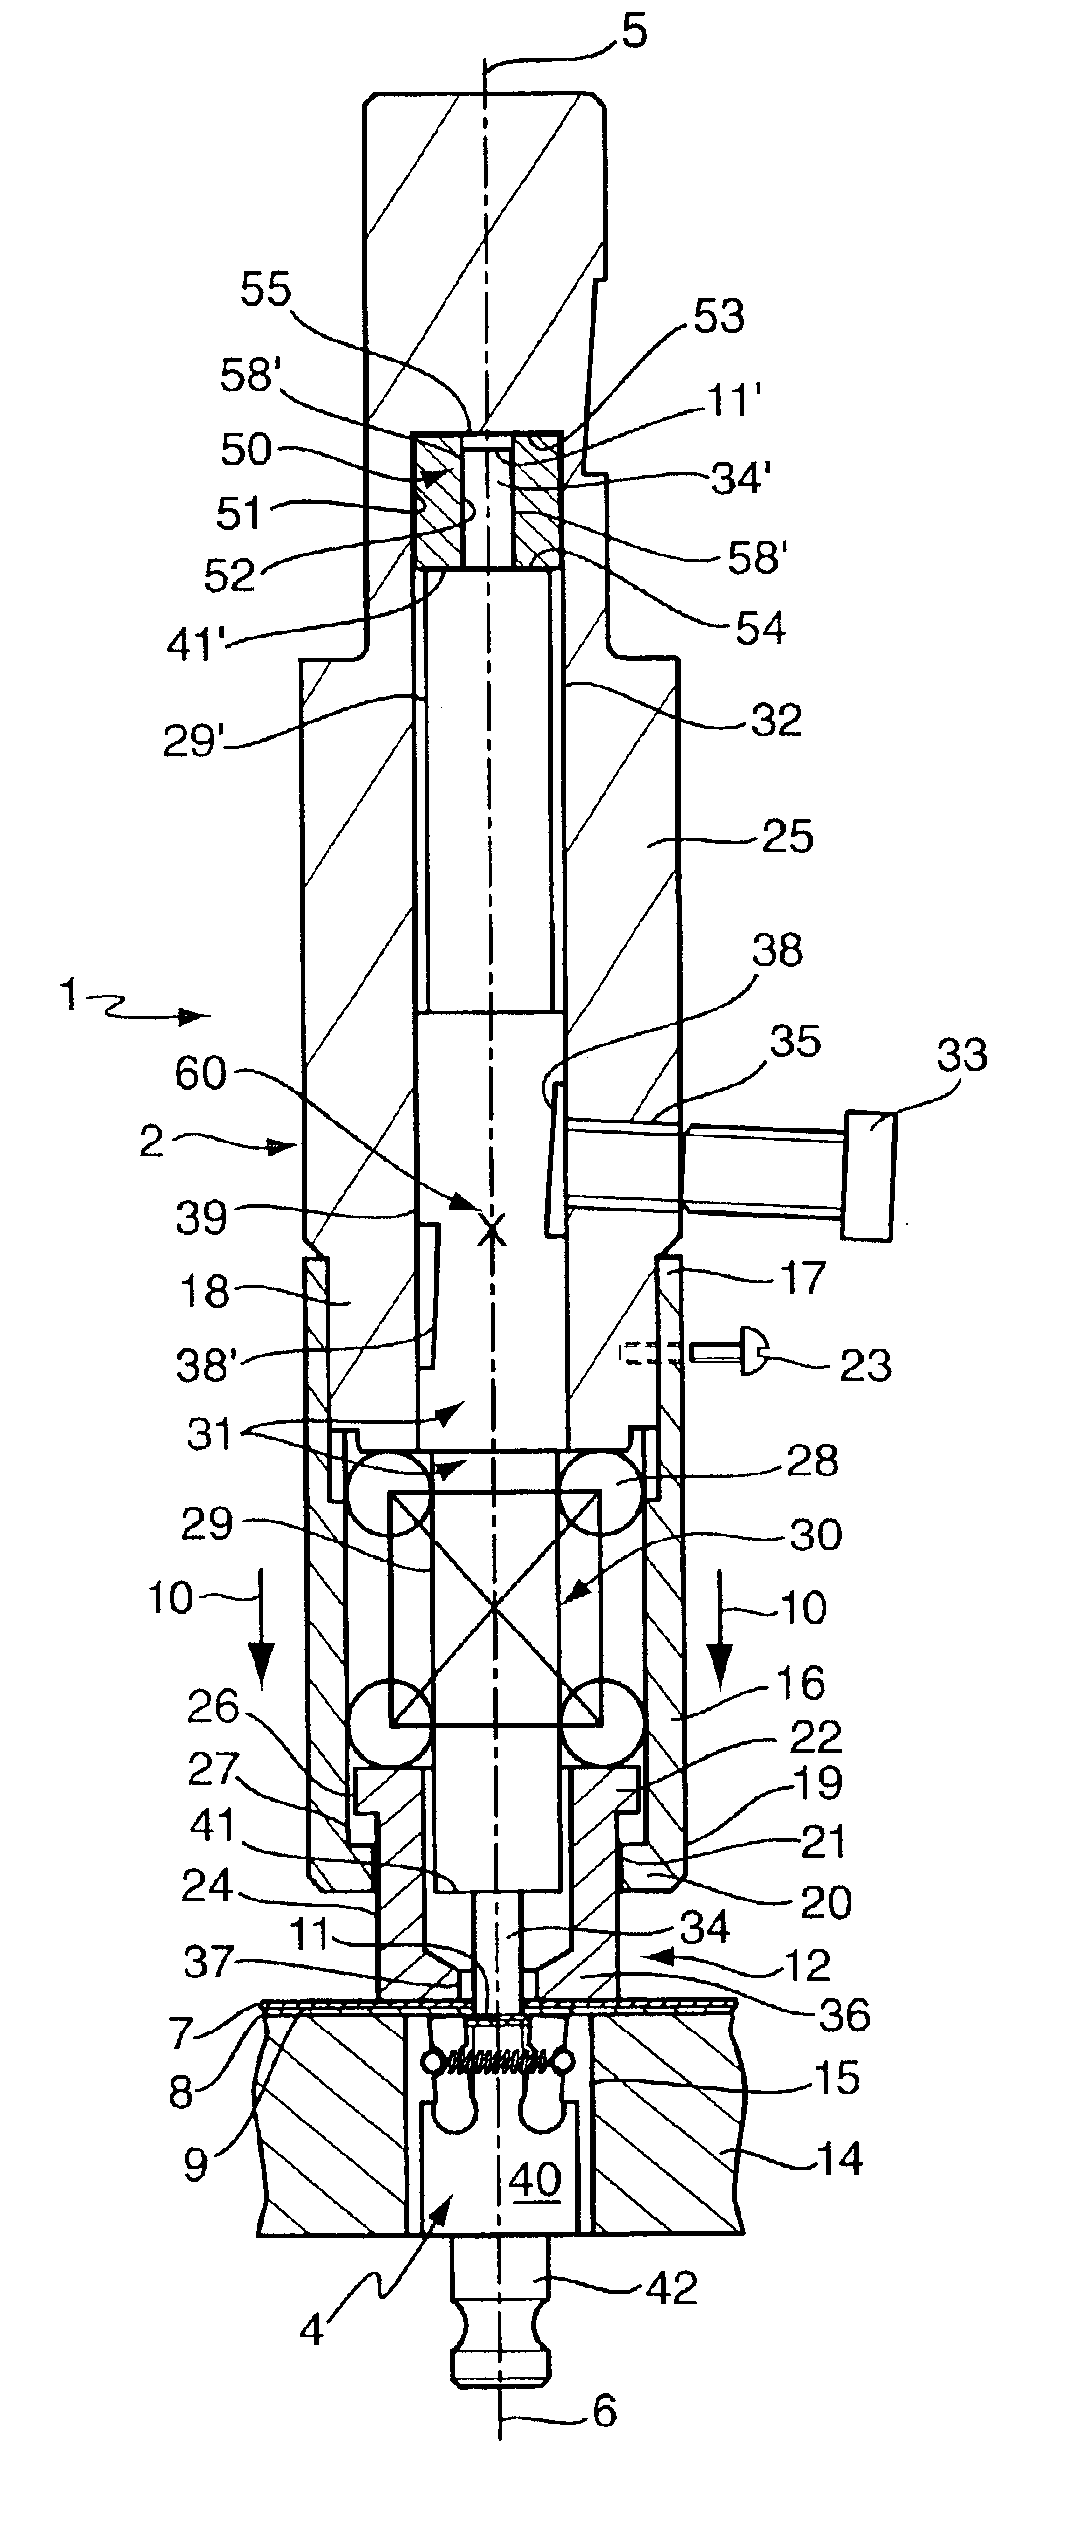 Punch for a ductile material joining tool